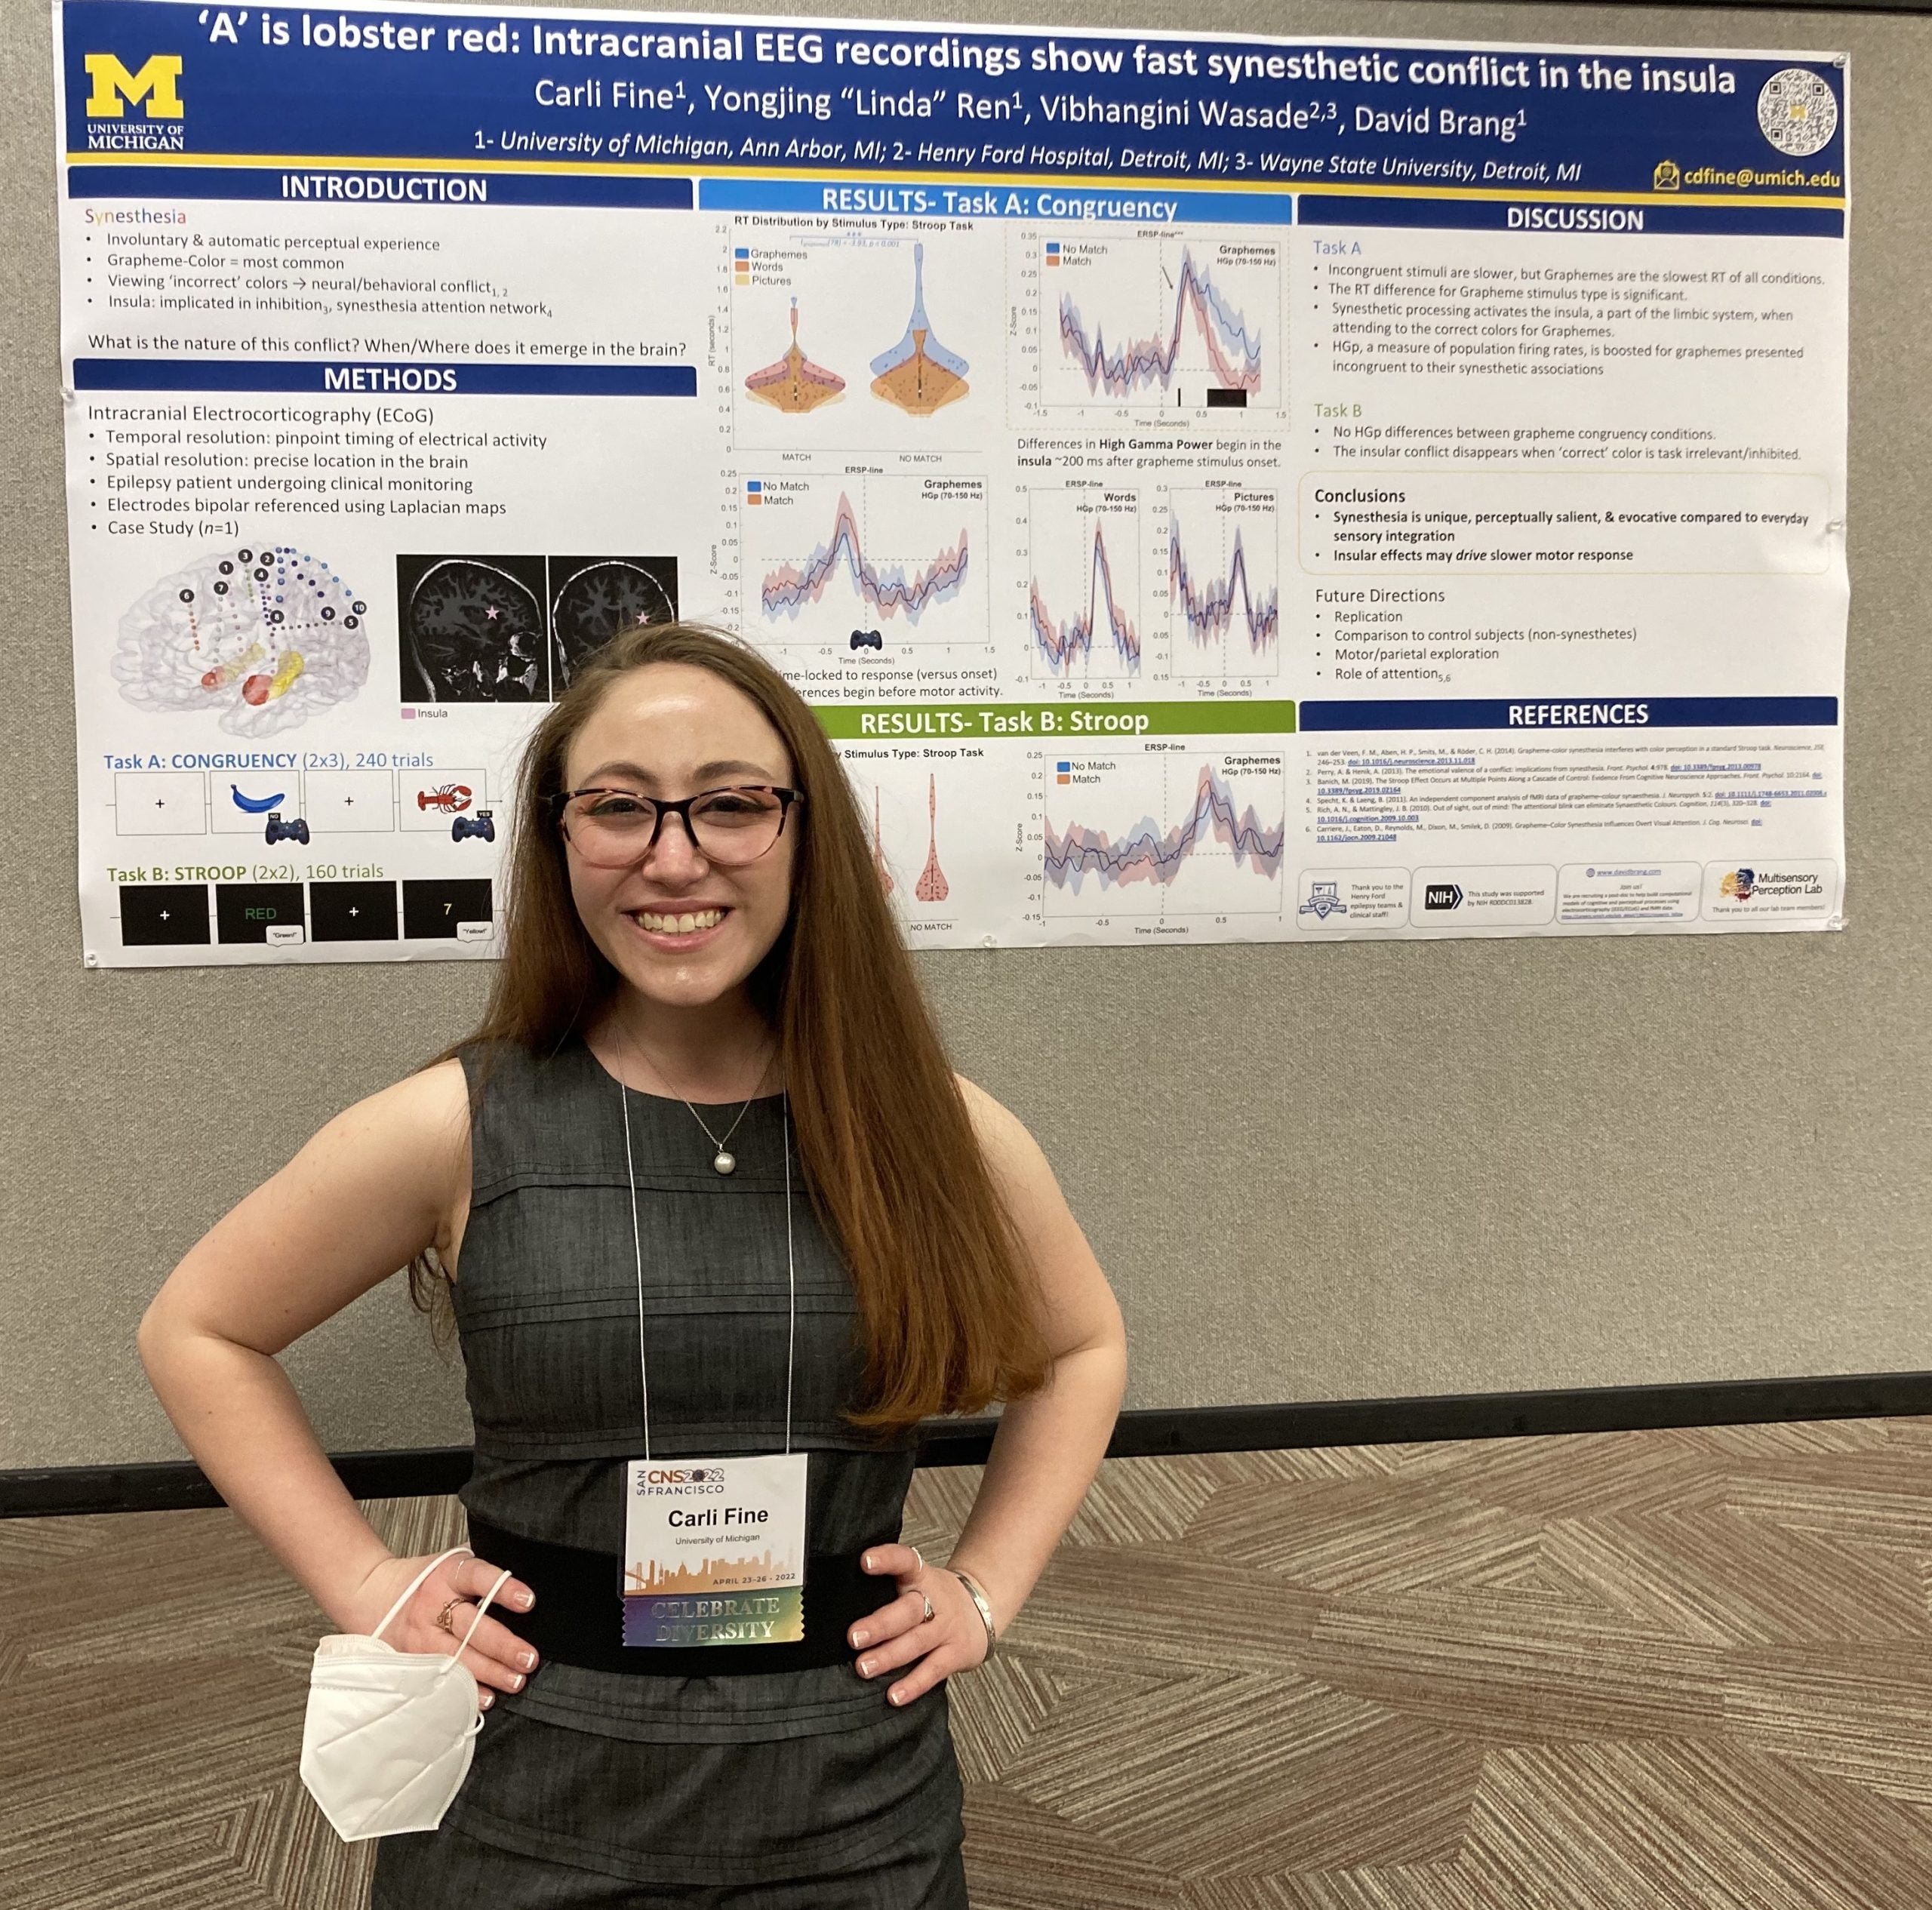 Carli with poster that says: "A" is lobster red: Intracranial EEG recordings show fast synesthetic conflict in the insula